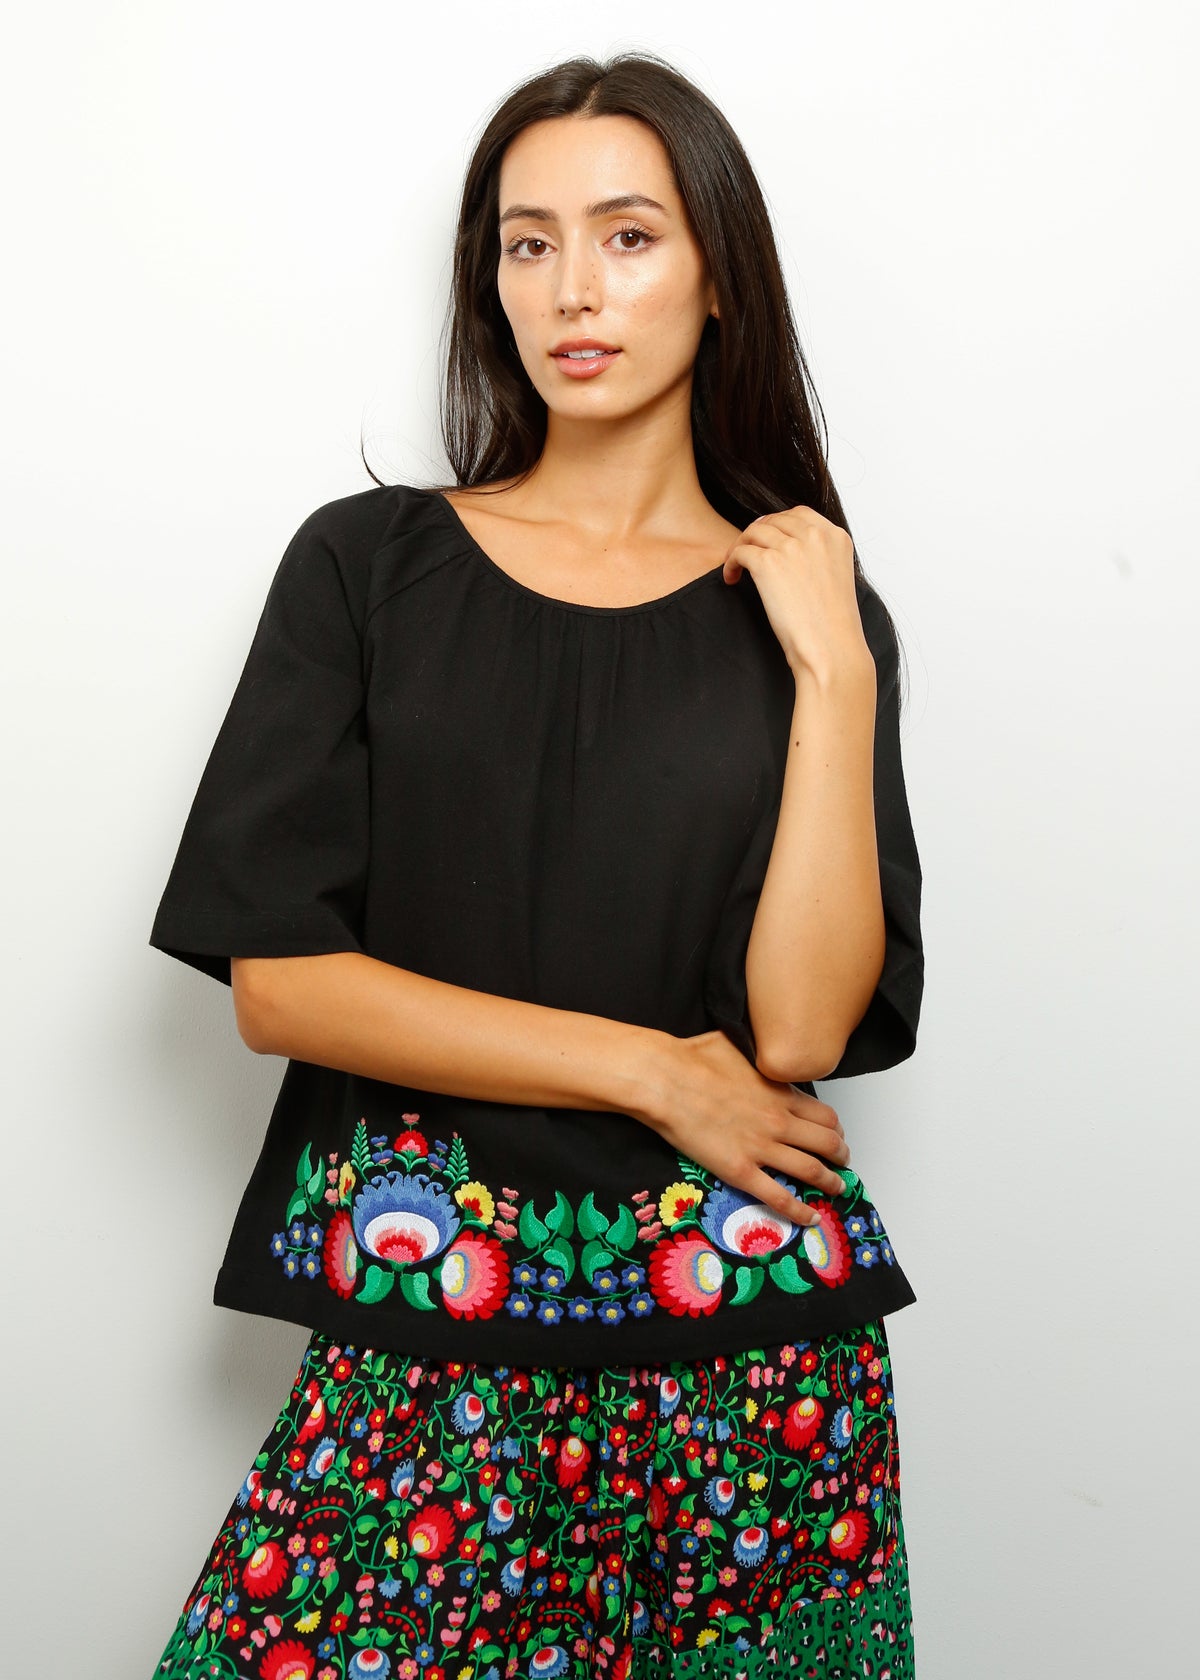 PPL Violet Top in Fire Flower Embroidery 01 Black